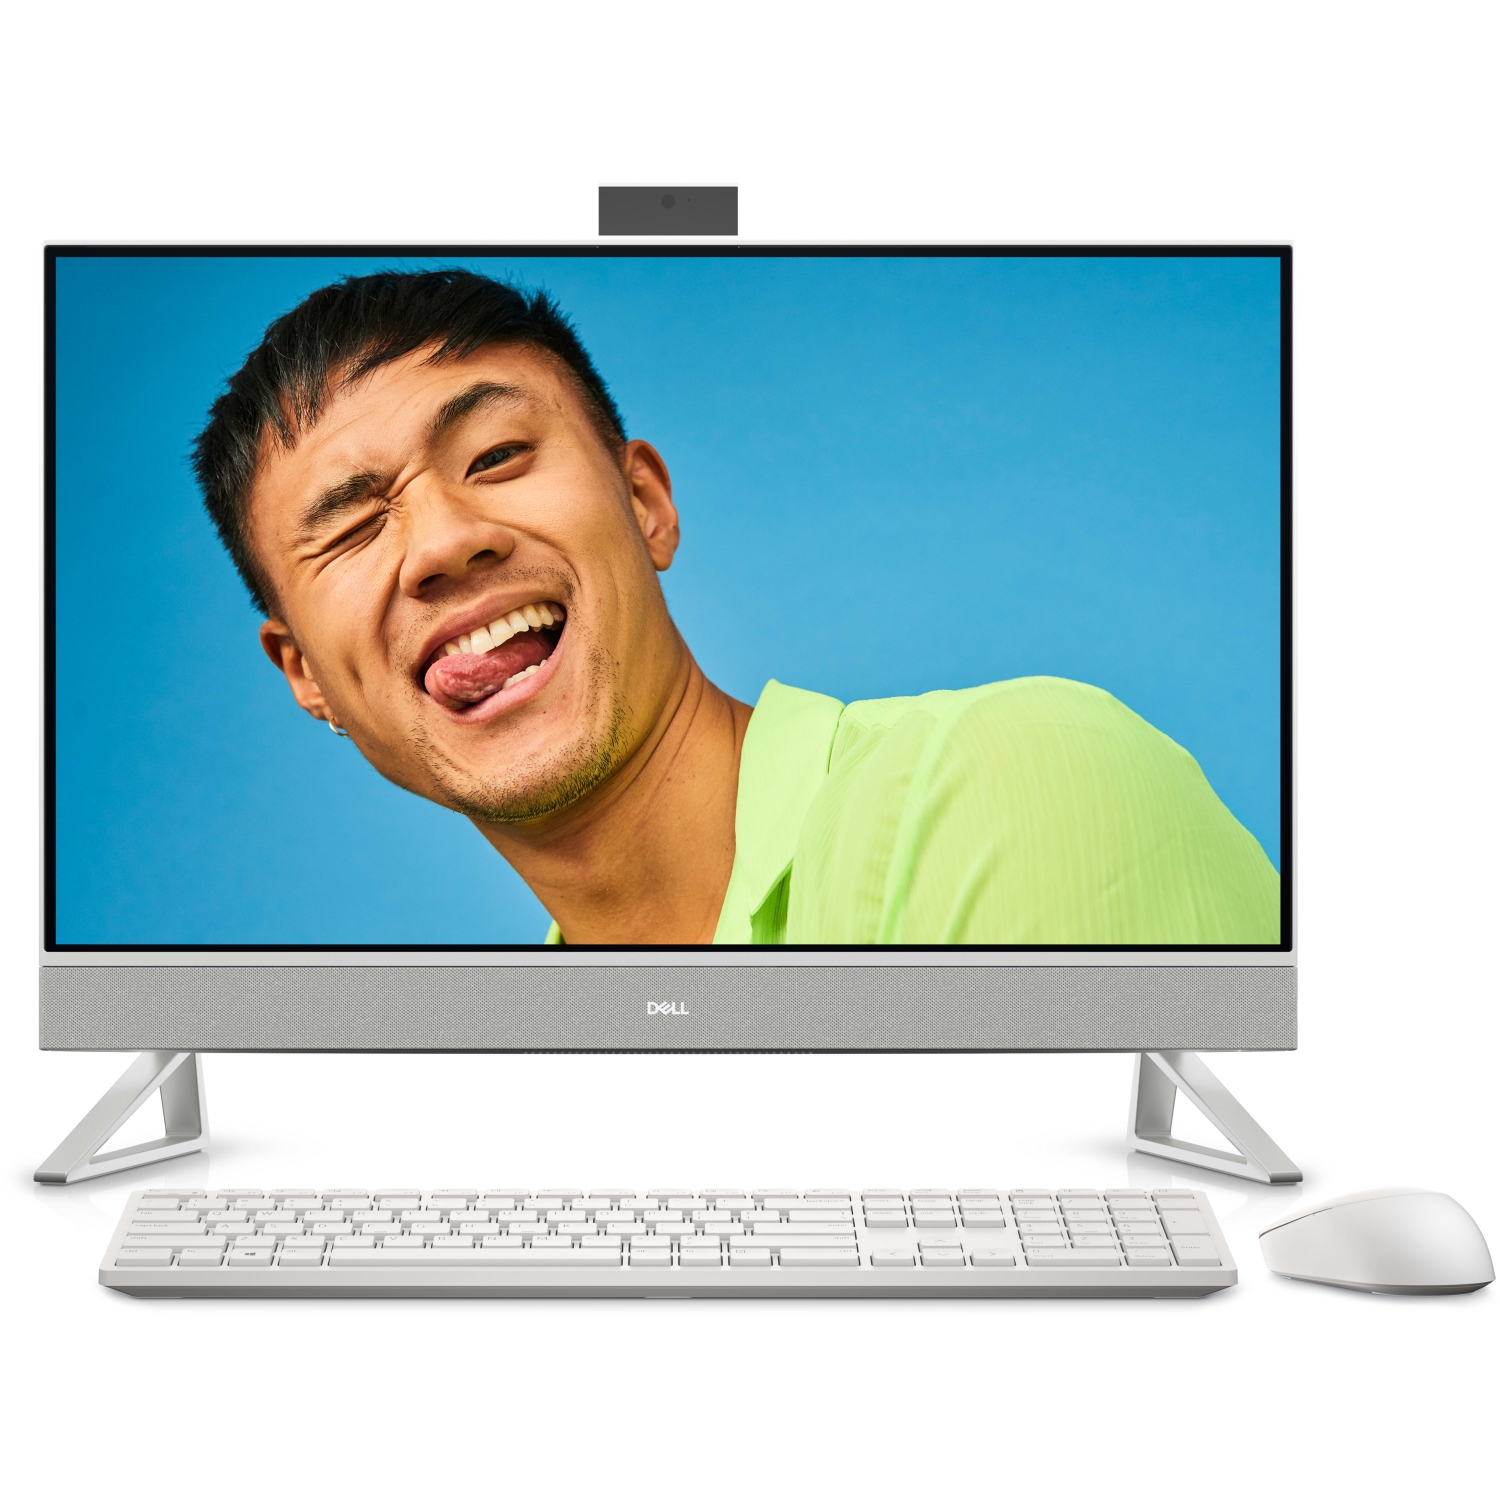 Refurbished (Excellent) – Dell Inspiron 7710 AIO (2022) | 27" FHD | Core i7 - 512GB SSD - 12GB RAM | 10 Cores @ 4.7 GHz - 12th Gen CPU